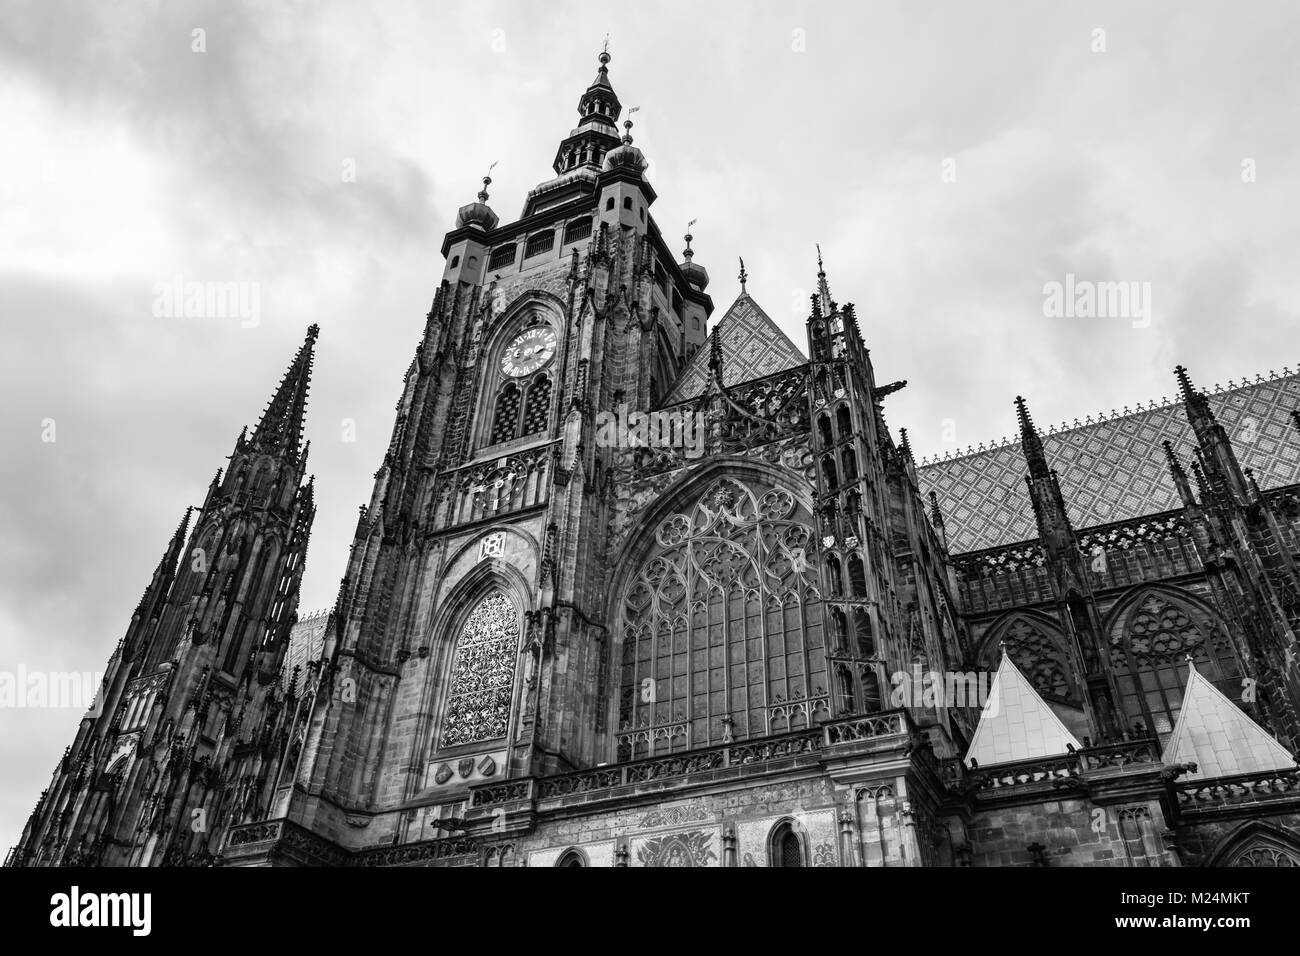 Prague, Czech Republic: Black and white view of the clock tower of  the metropolitan Cathedral of Saint Vitus, Wenceslaus and Adalbert Stock Photo